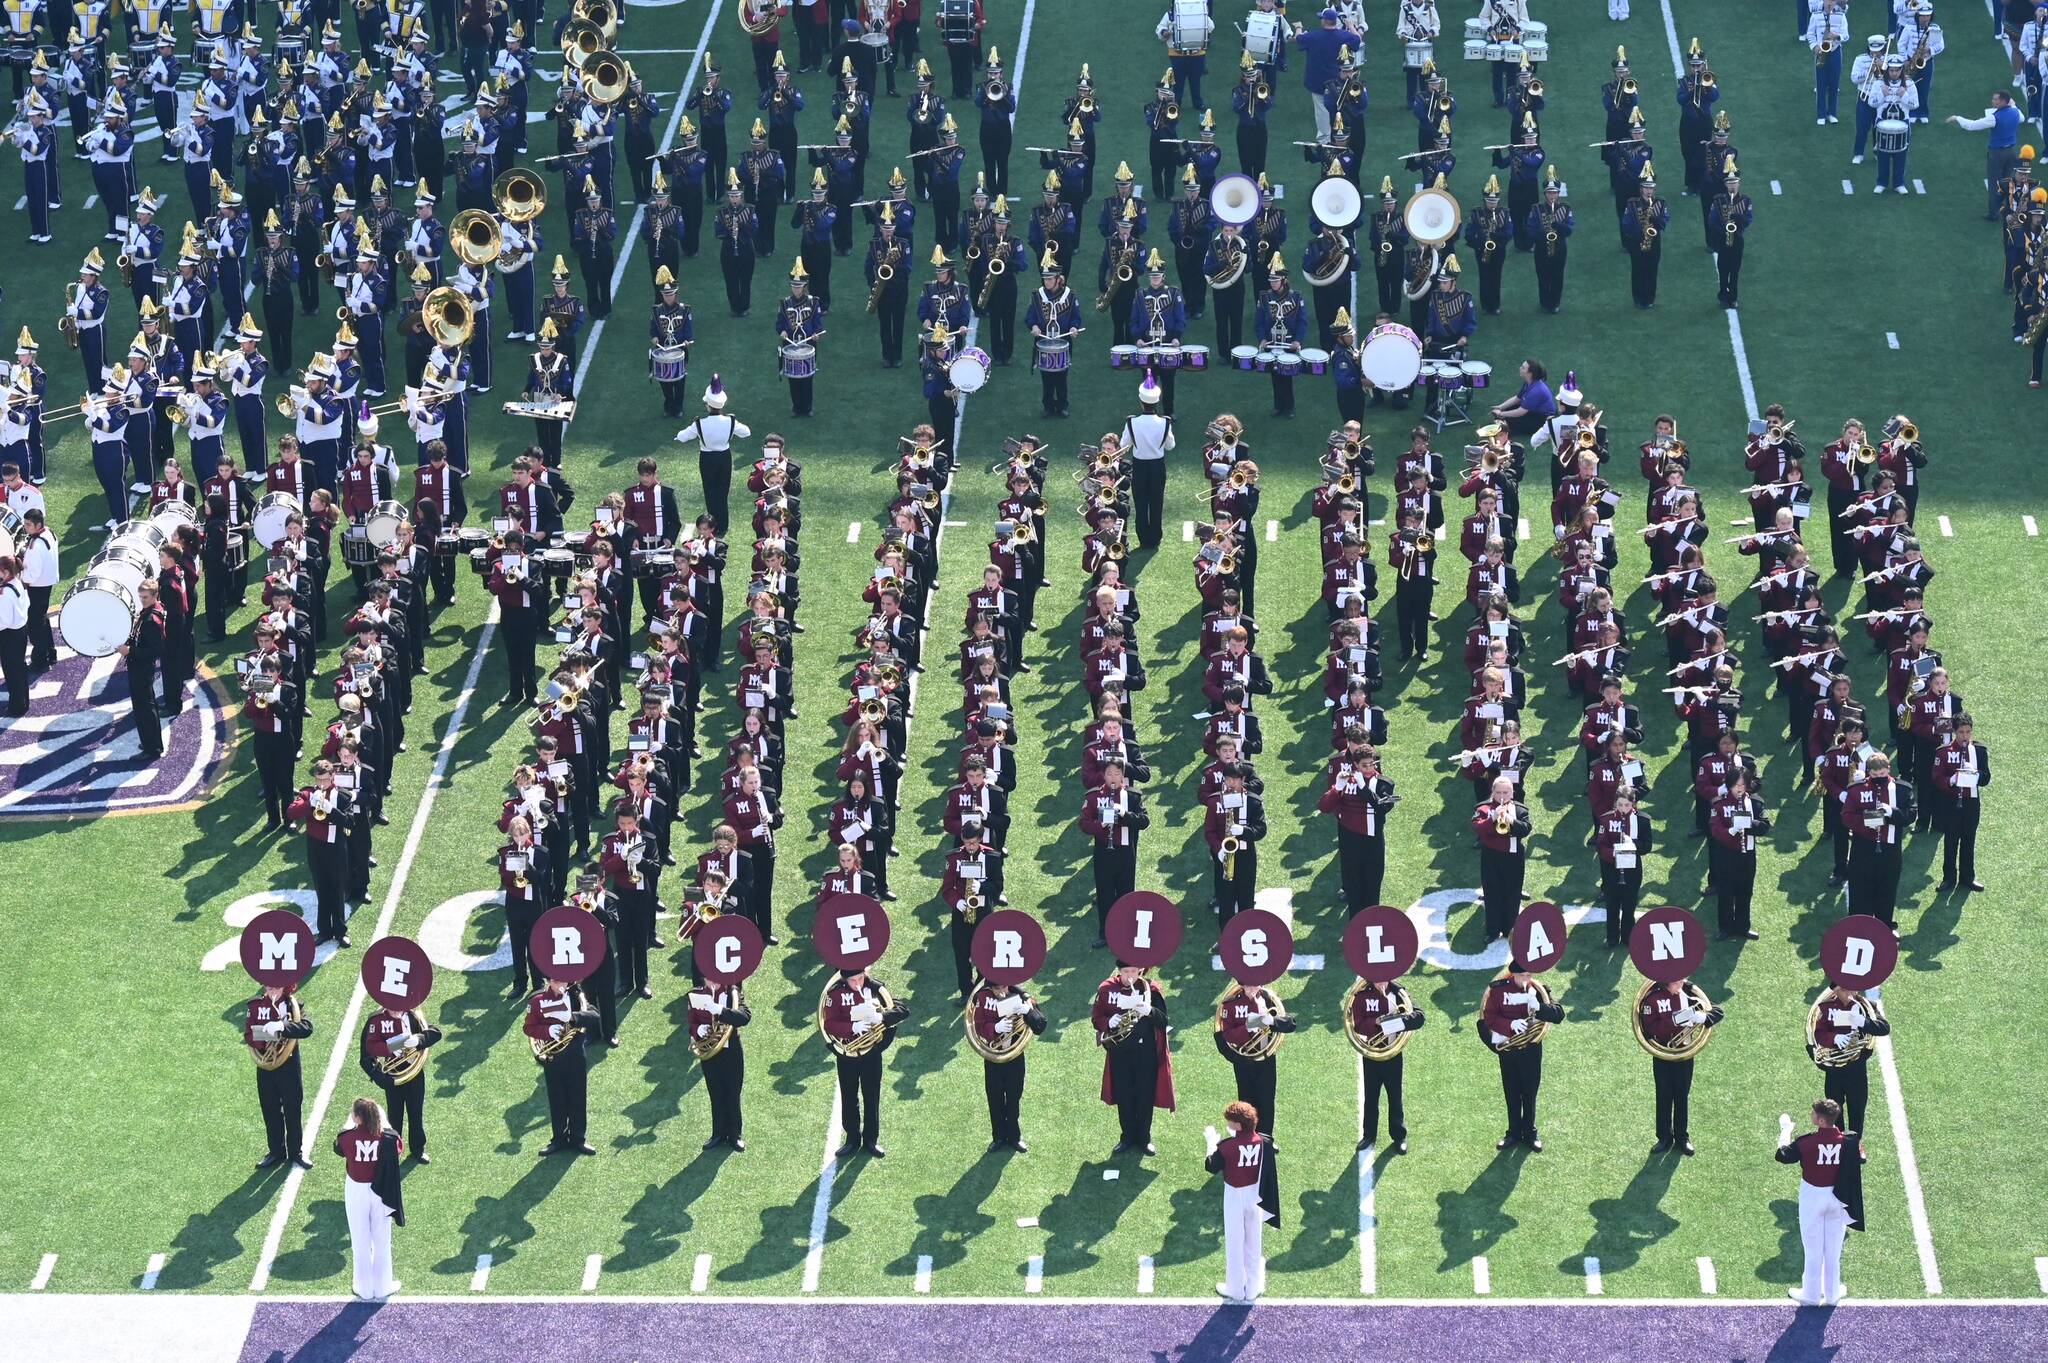 The Mercer Island High School marching band performs at Husky Band Day on Sept. 10 at the University of Washington. Photo courtesy of Jim Jantos